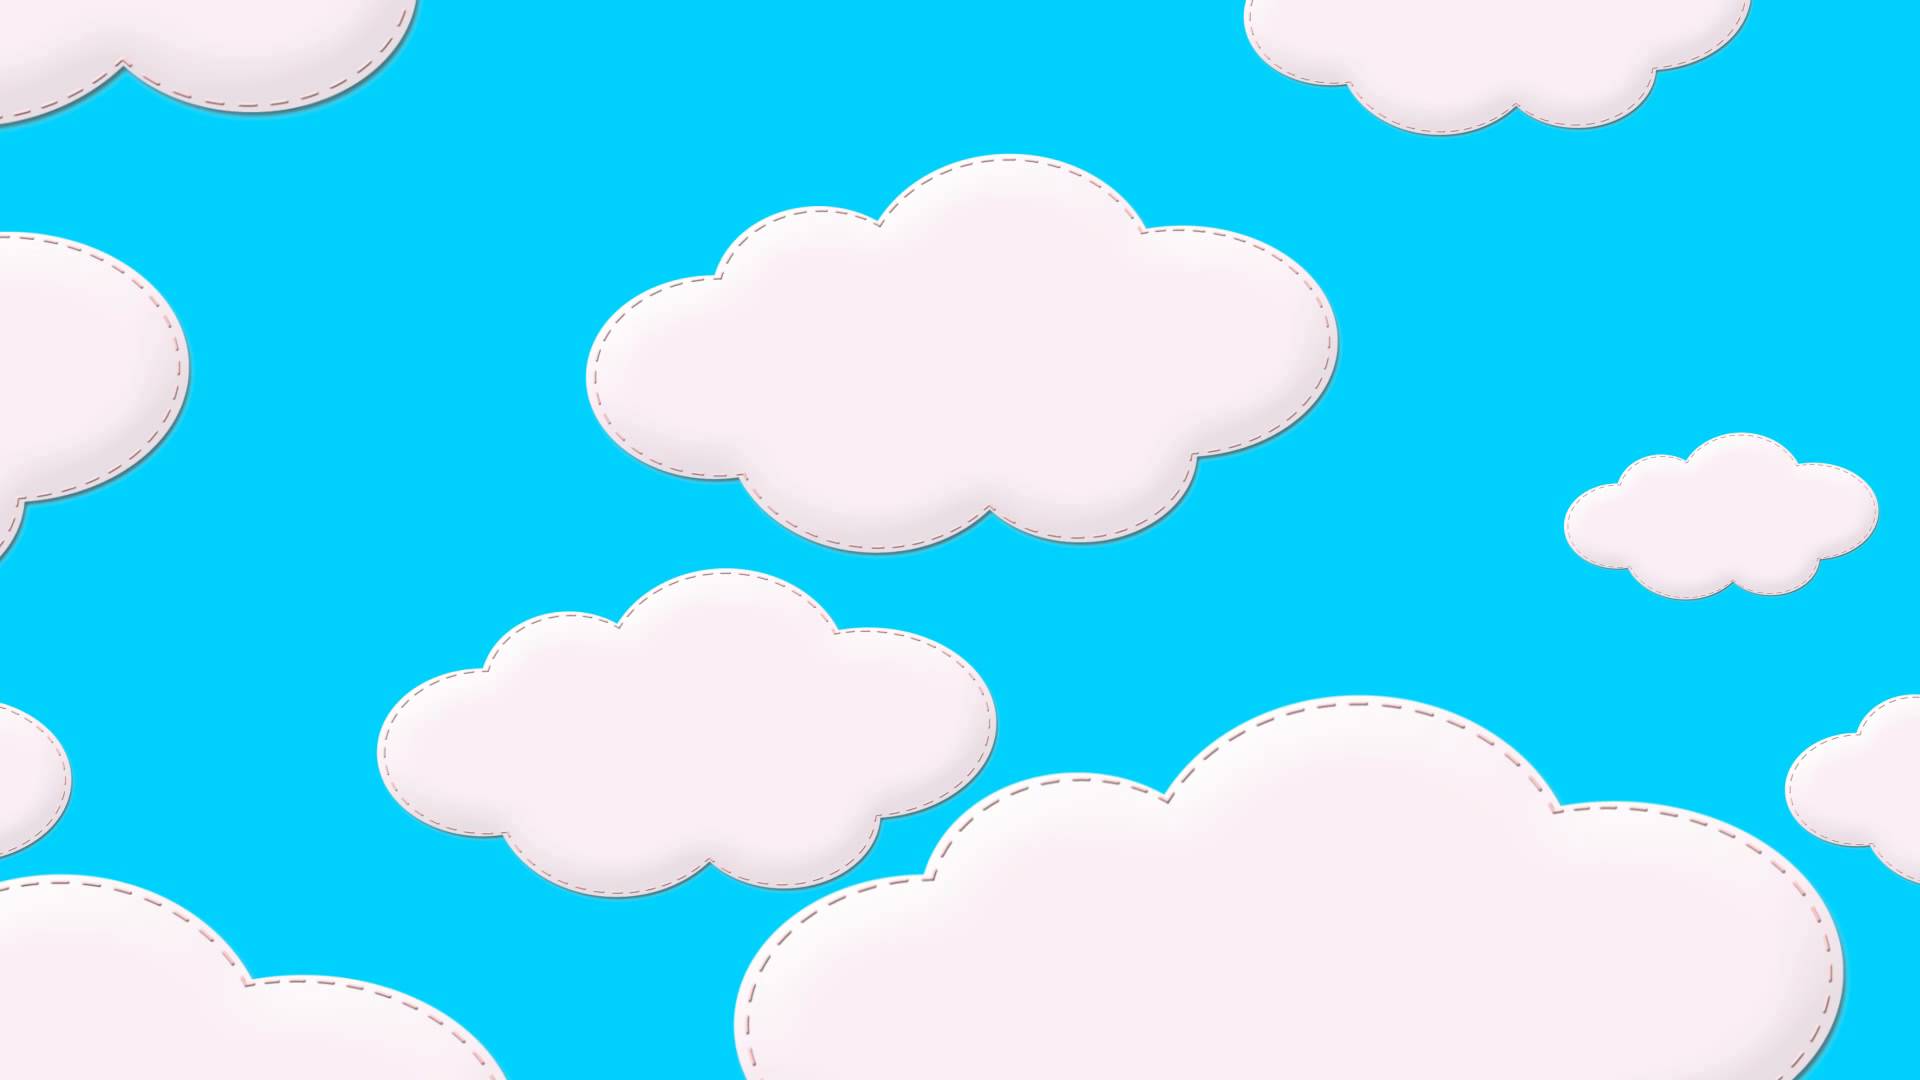 Free download Cartoon Clouds in Sky Free Royalty Animation Footage  [1920x1080] for your Desktop, Mobile & Tablet | Explore 50+ Moving Clouds  Wallpaper | Storm Clouds Wallpaper, Clouds Wallpaper, Dark Clouds Wallpaper